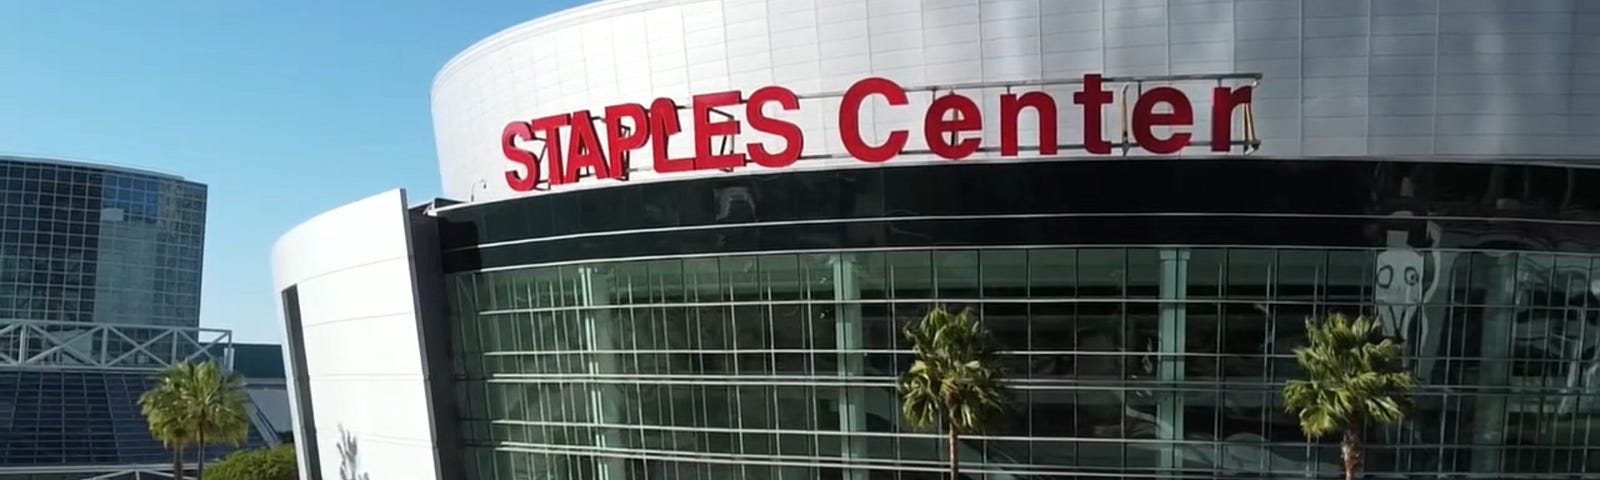 The home team is 0–2 at the Staples Center so far. Are the LA Clippers already dead and buried? And are the Lakers ready to come home and win?